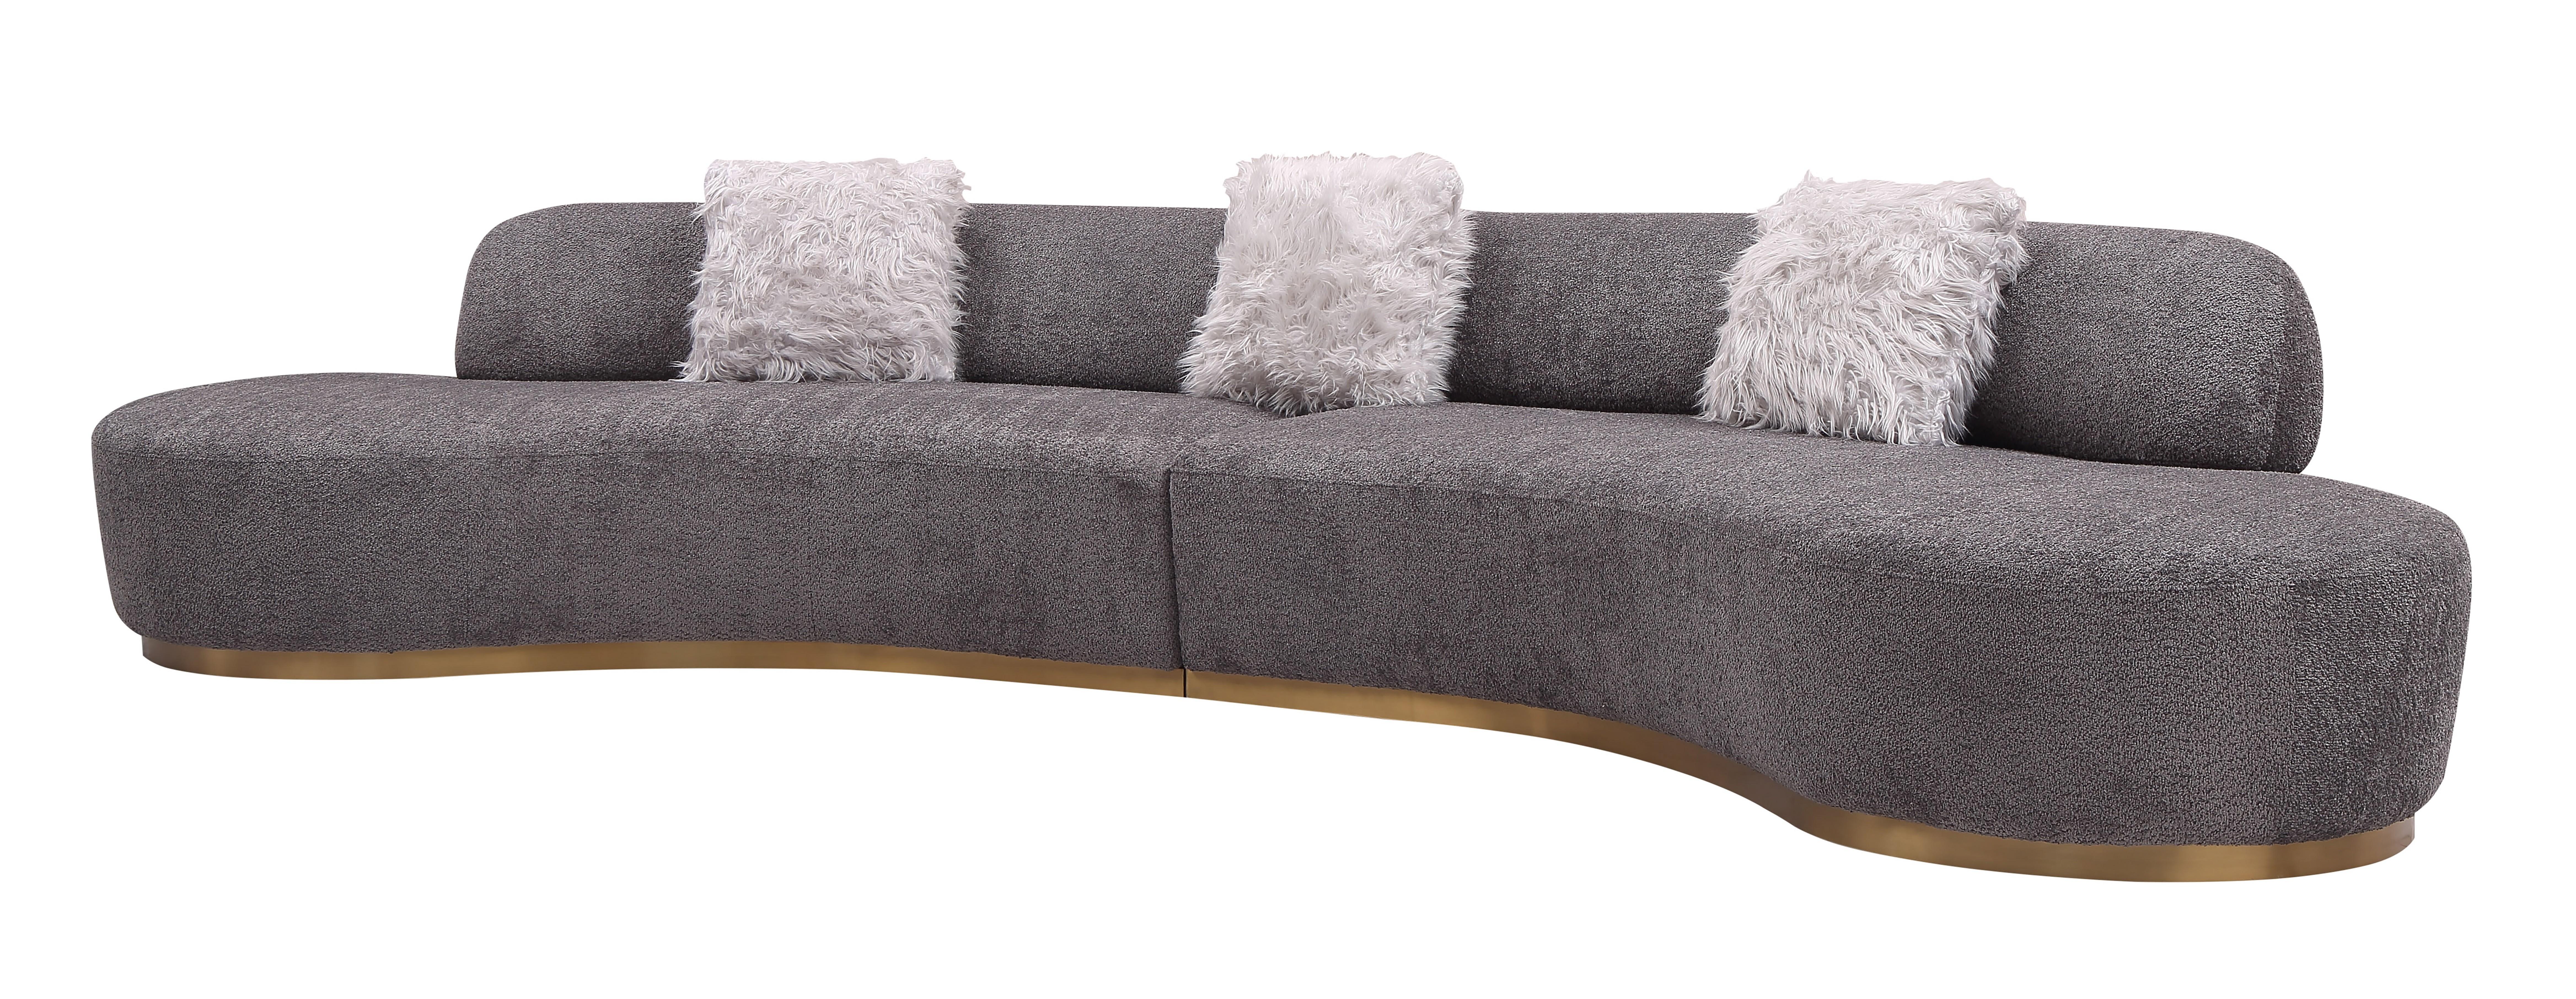 Contemporary Sectional Sofa Moon SKU 18632-S in Gray Fabric